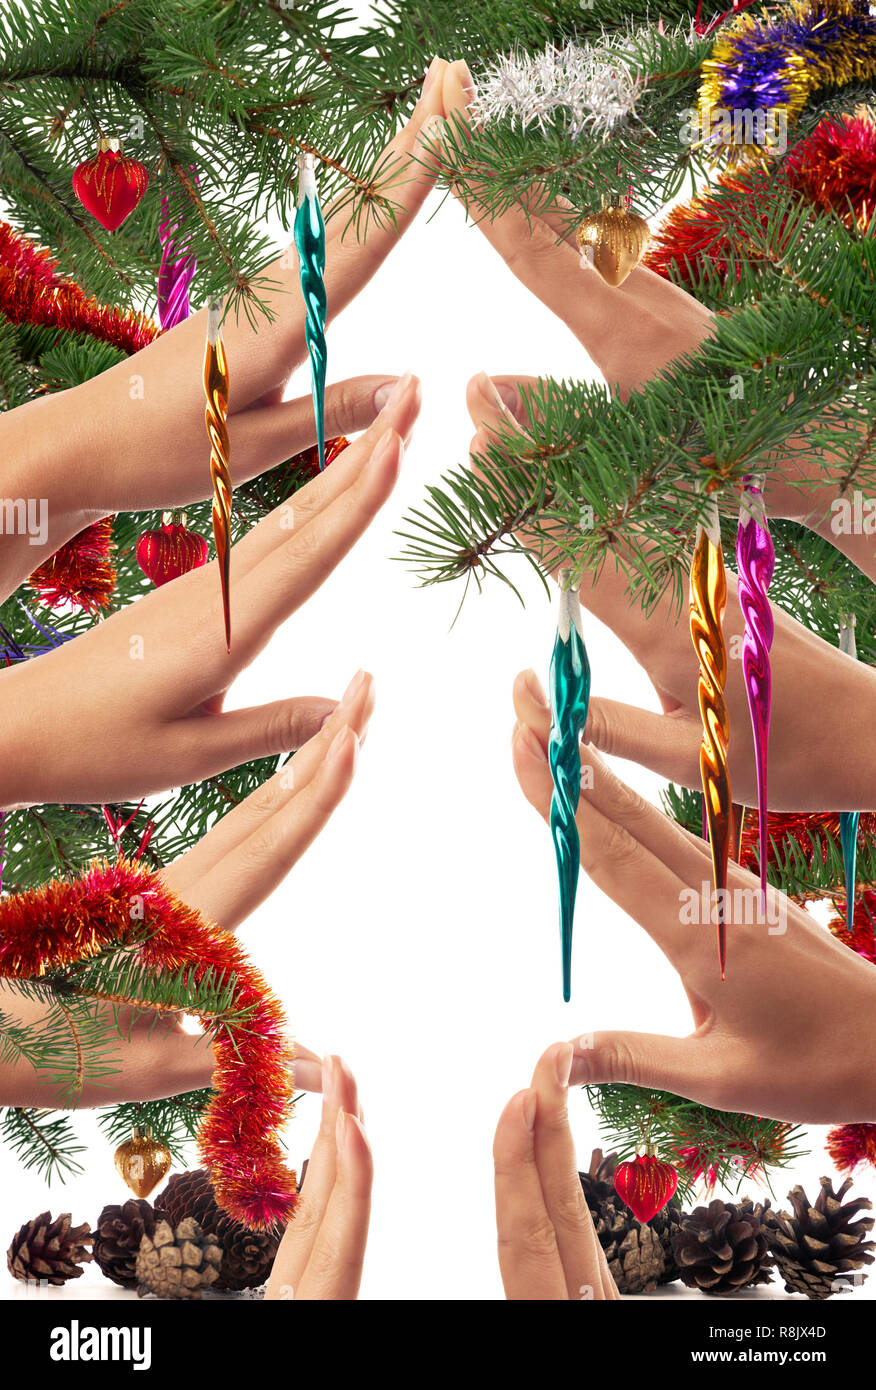 Christmas themed concept of hands making a Christmas tree shape framed with branches and colorful ornaments on white background Stock Photo